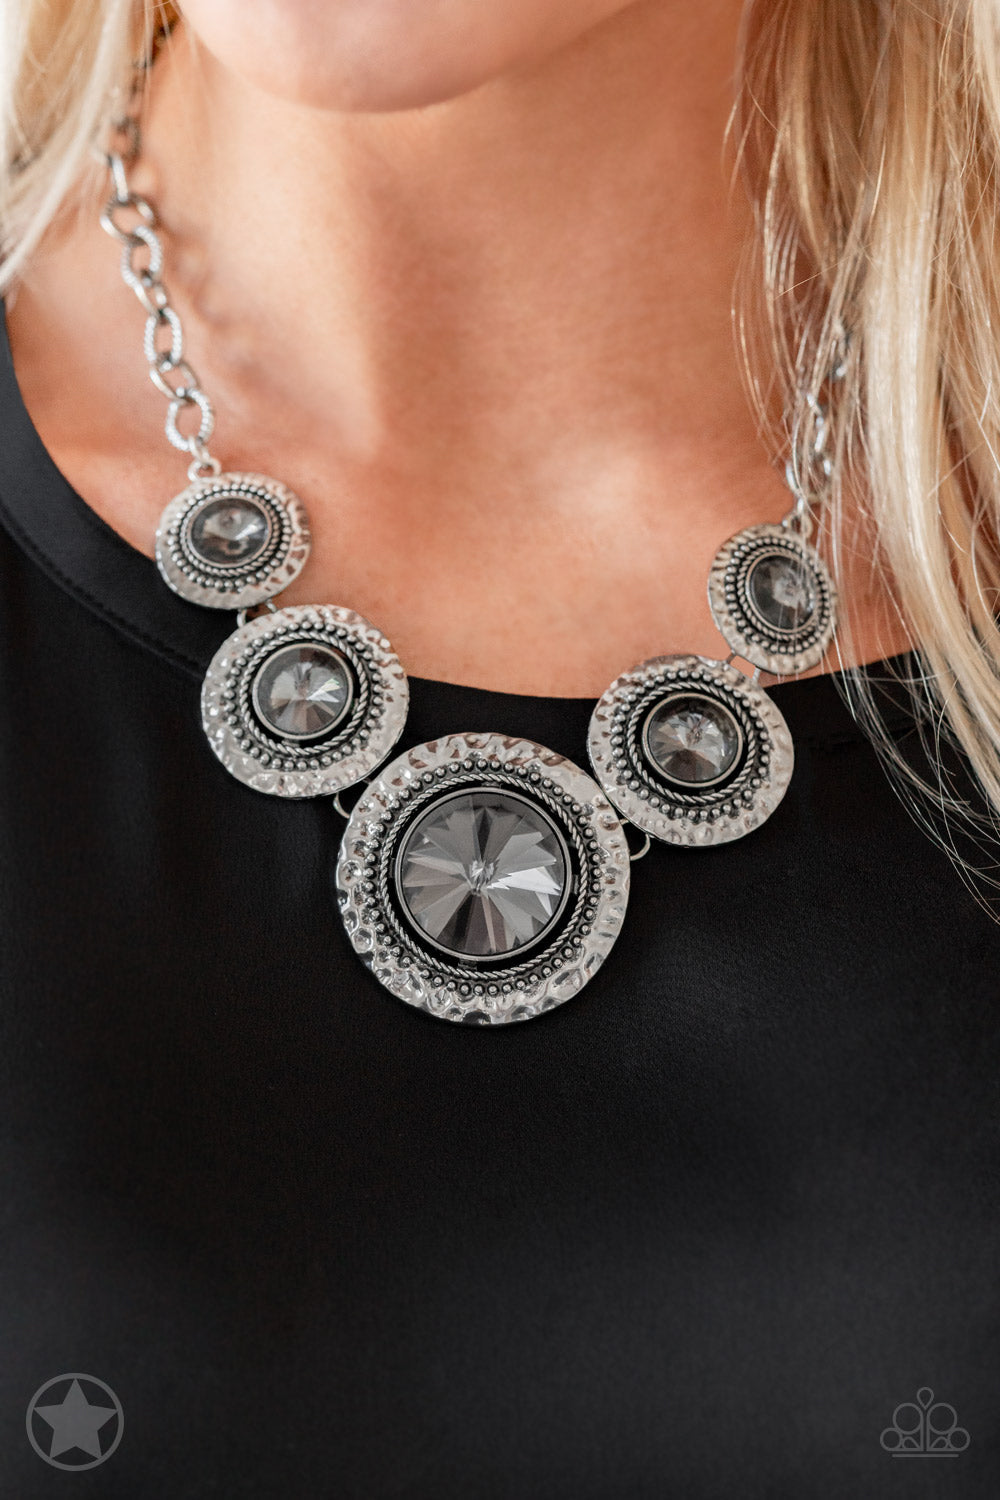 Global Glamour Necklace - Paparazzi Accessories - Gradually increasing in size, dramatically oversized smoky gems are pressed into the centers of hammered and silver studded frames. The blinding frames link below the collar for a glamorous, statement-making finish.